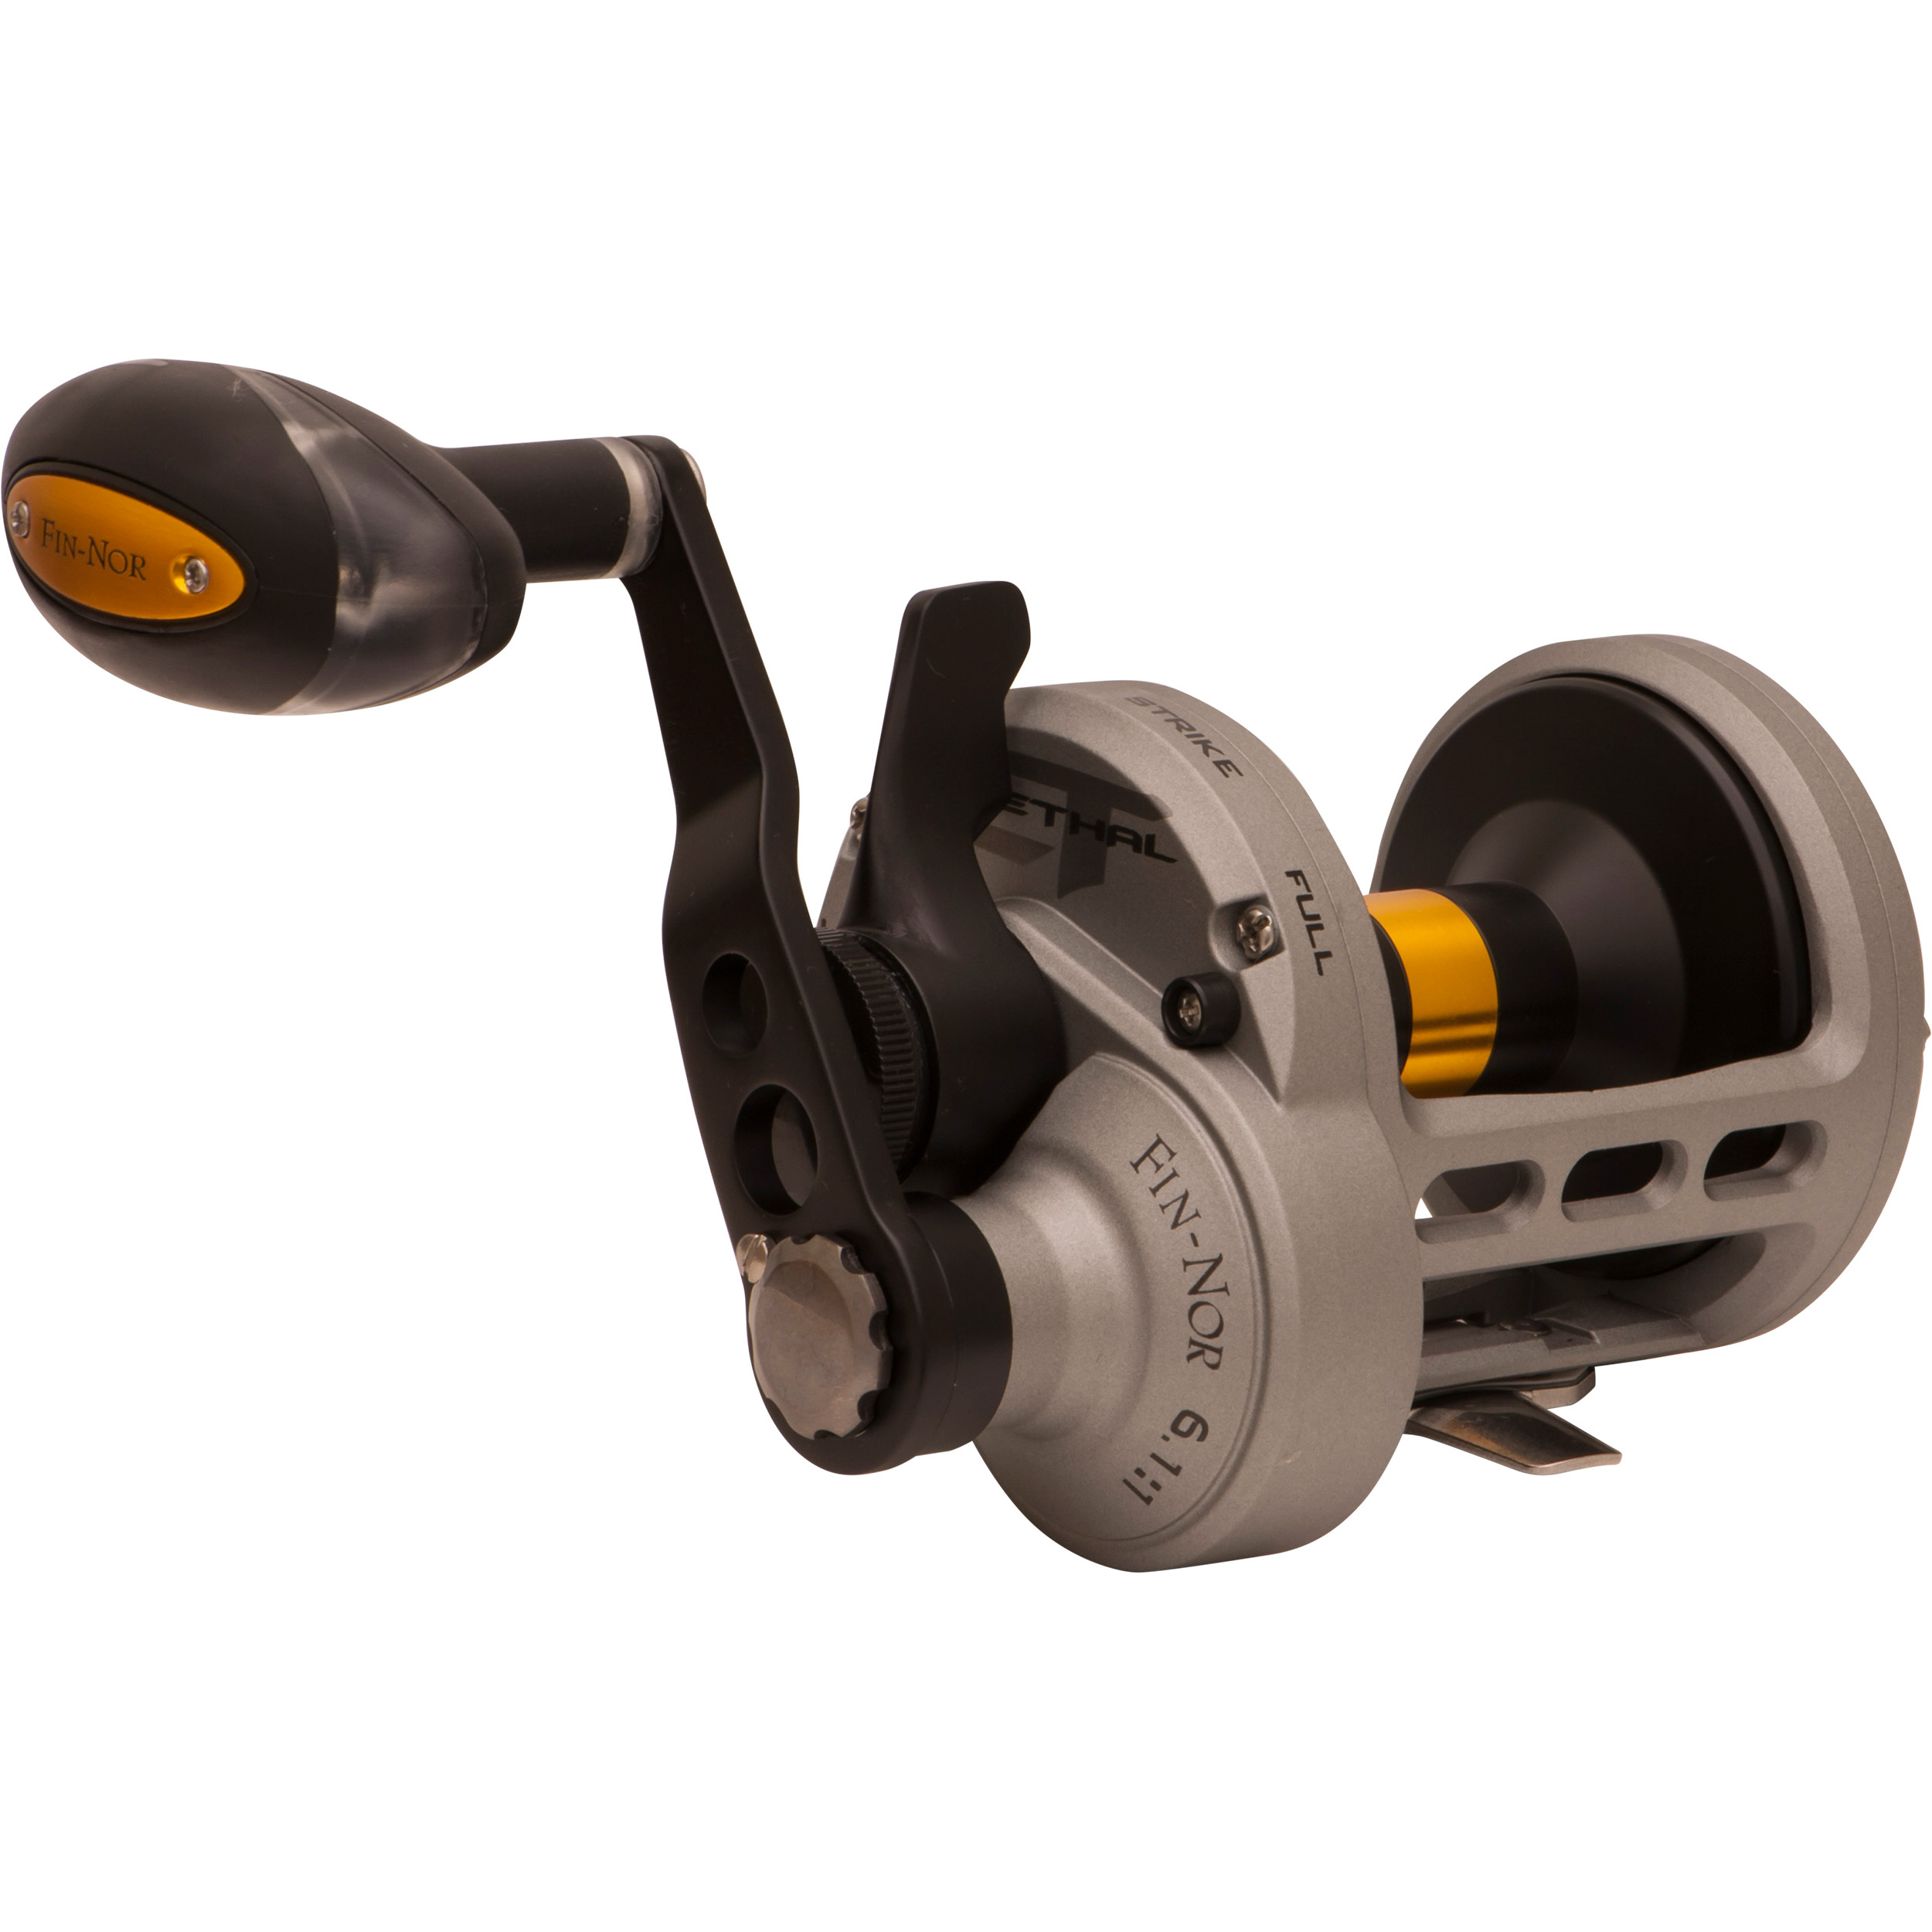 Fin-Nor Lethal LTL20 2 Speed OH Lever Drag Overhead Fishing Reel 